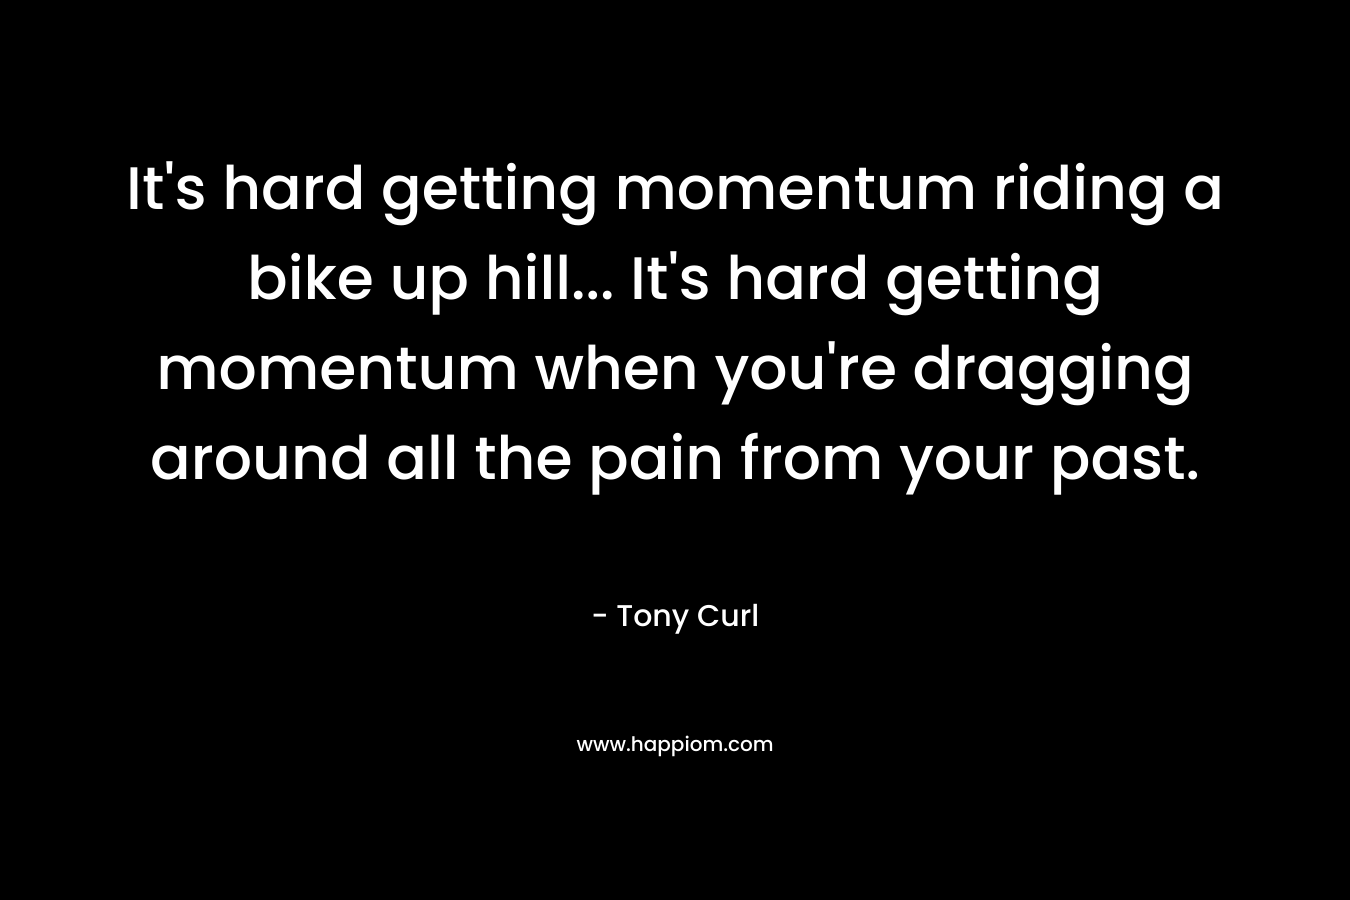 It’s hard getting momentum riding a bike up hill… It’s hard getting momentum when you’re dragging around all the pain from your past. – Tony Curl